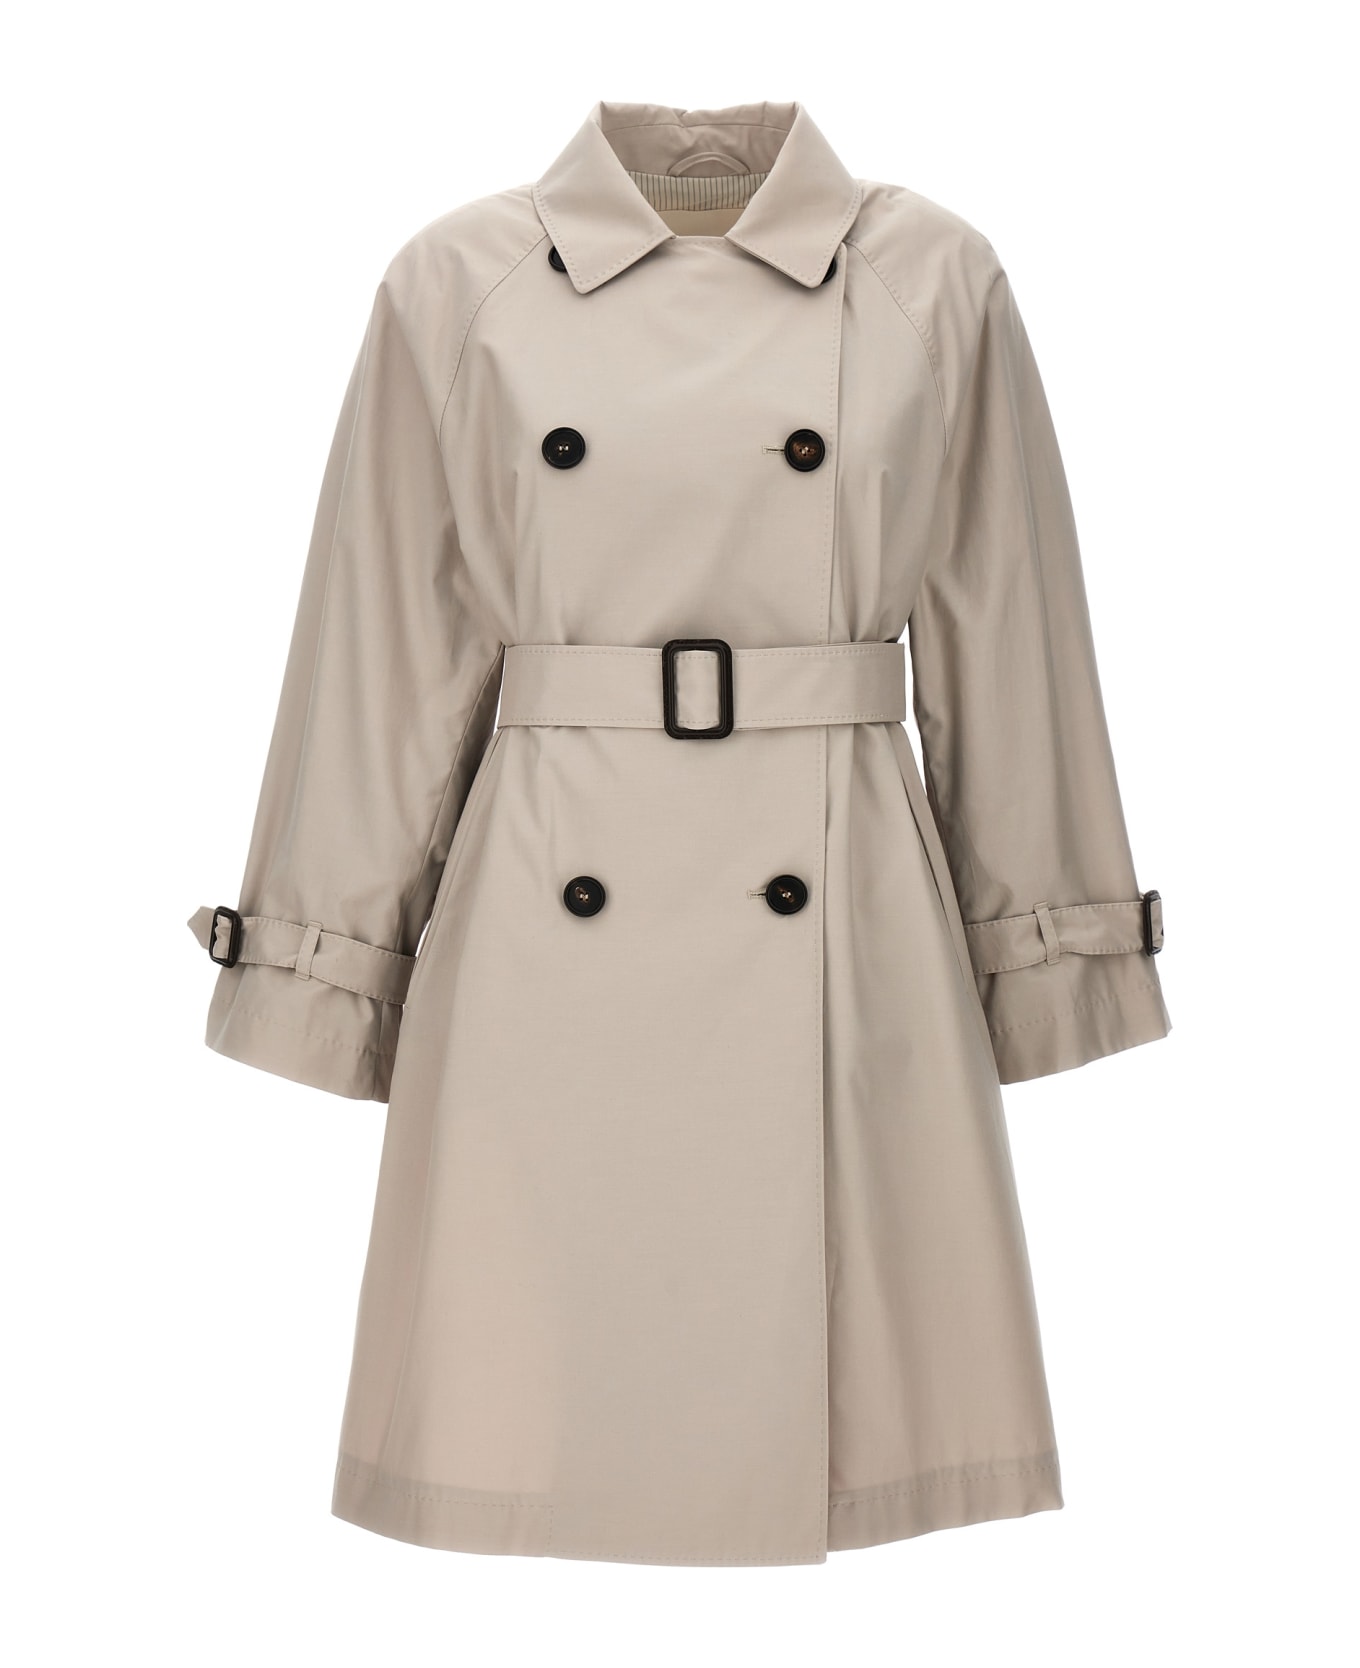 Max Mara The Cube 'titrench' Trench Coat - Beige